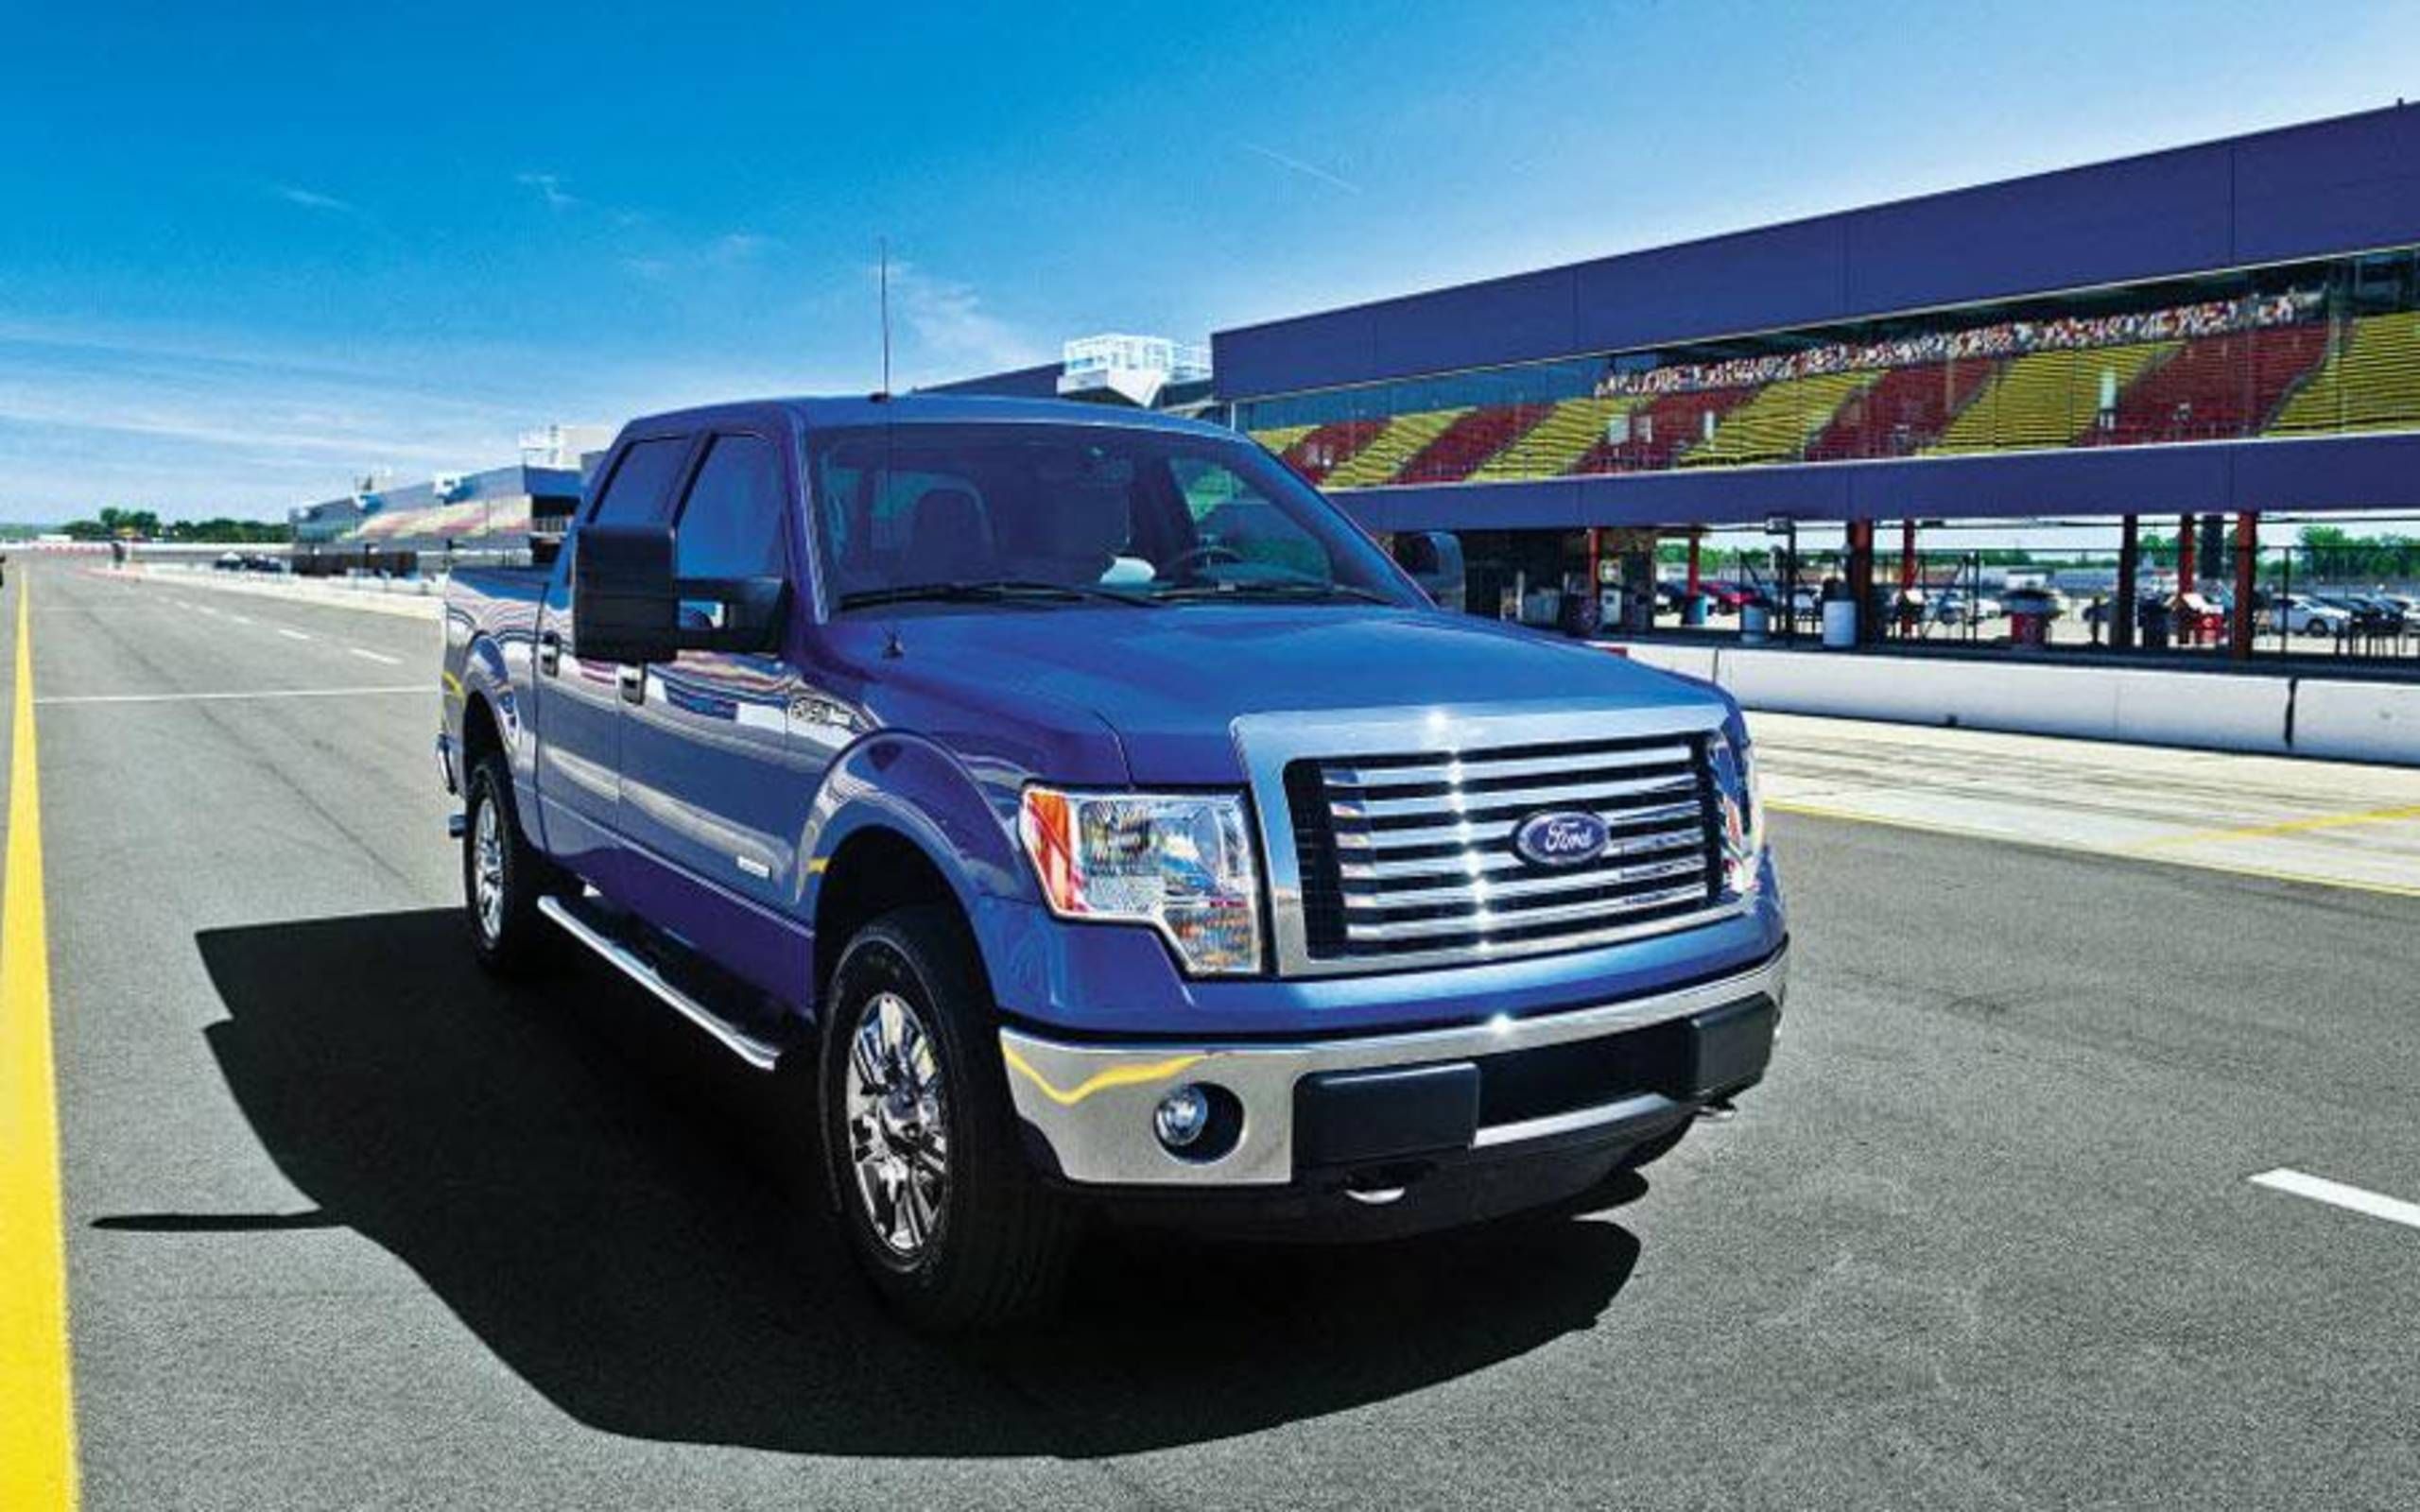 2012 Ford F-150 Autoweek Autofile car review